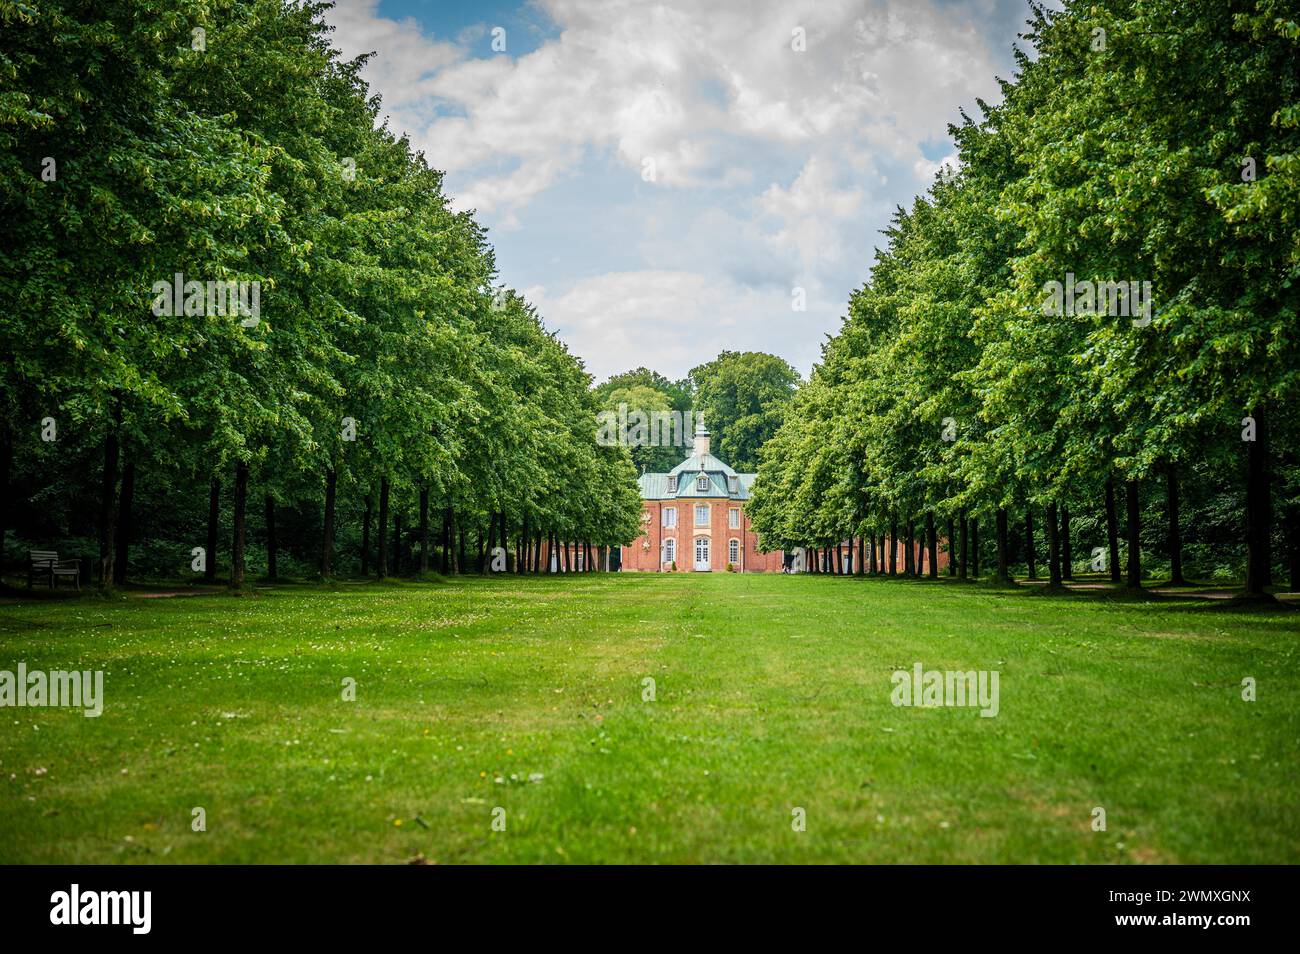 Classic red castle surrounded by green trees under a clear sky, Clemenswerth Castle, Soegel, Lower Saxony Stock Photo